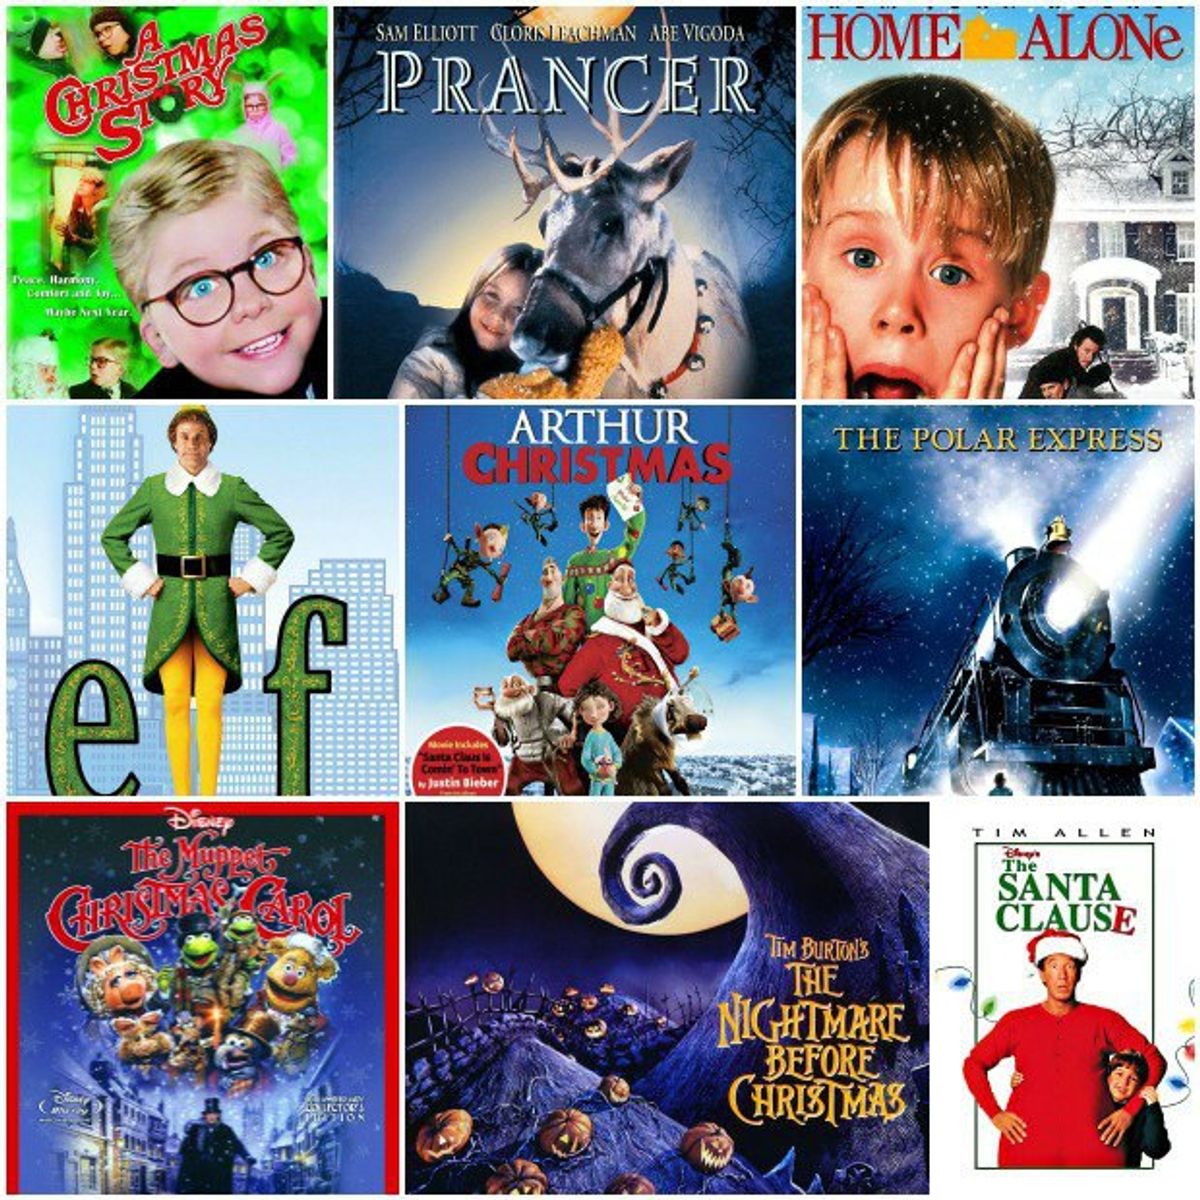 5 of The Best Holiday Movies